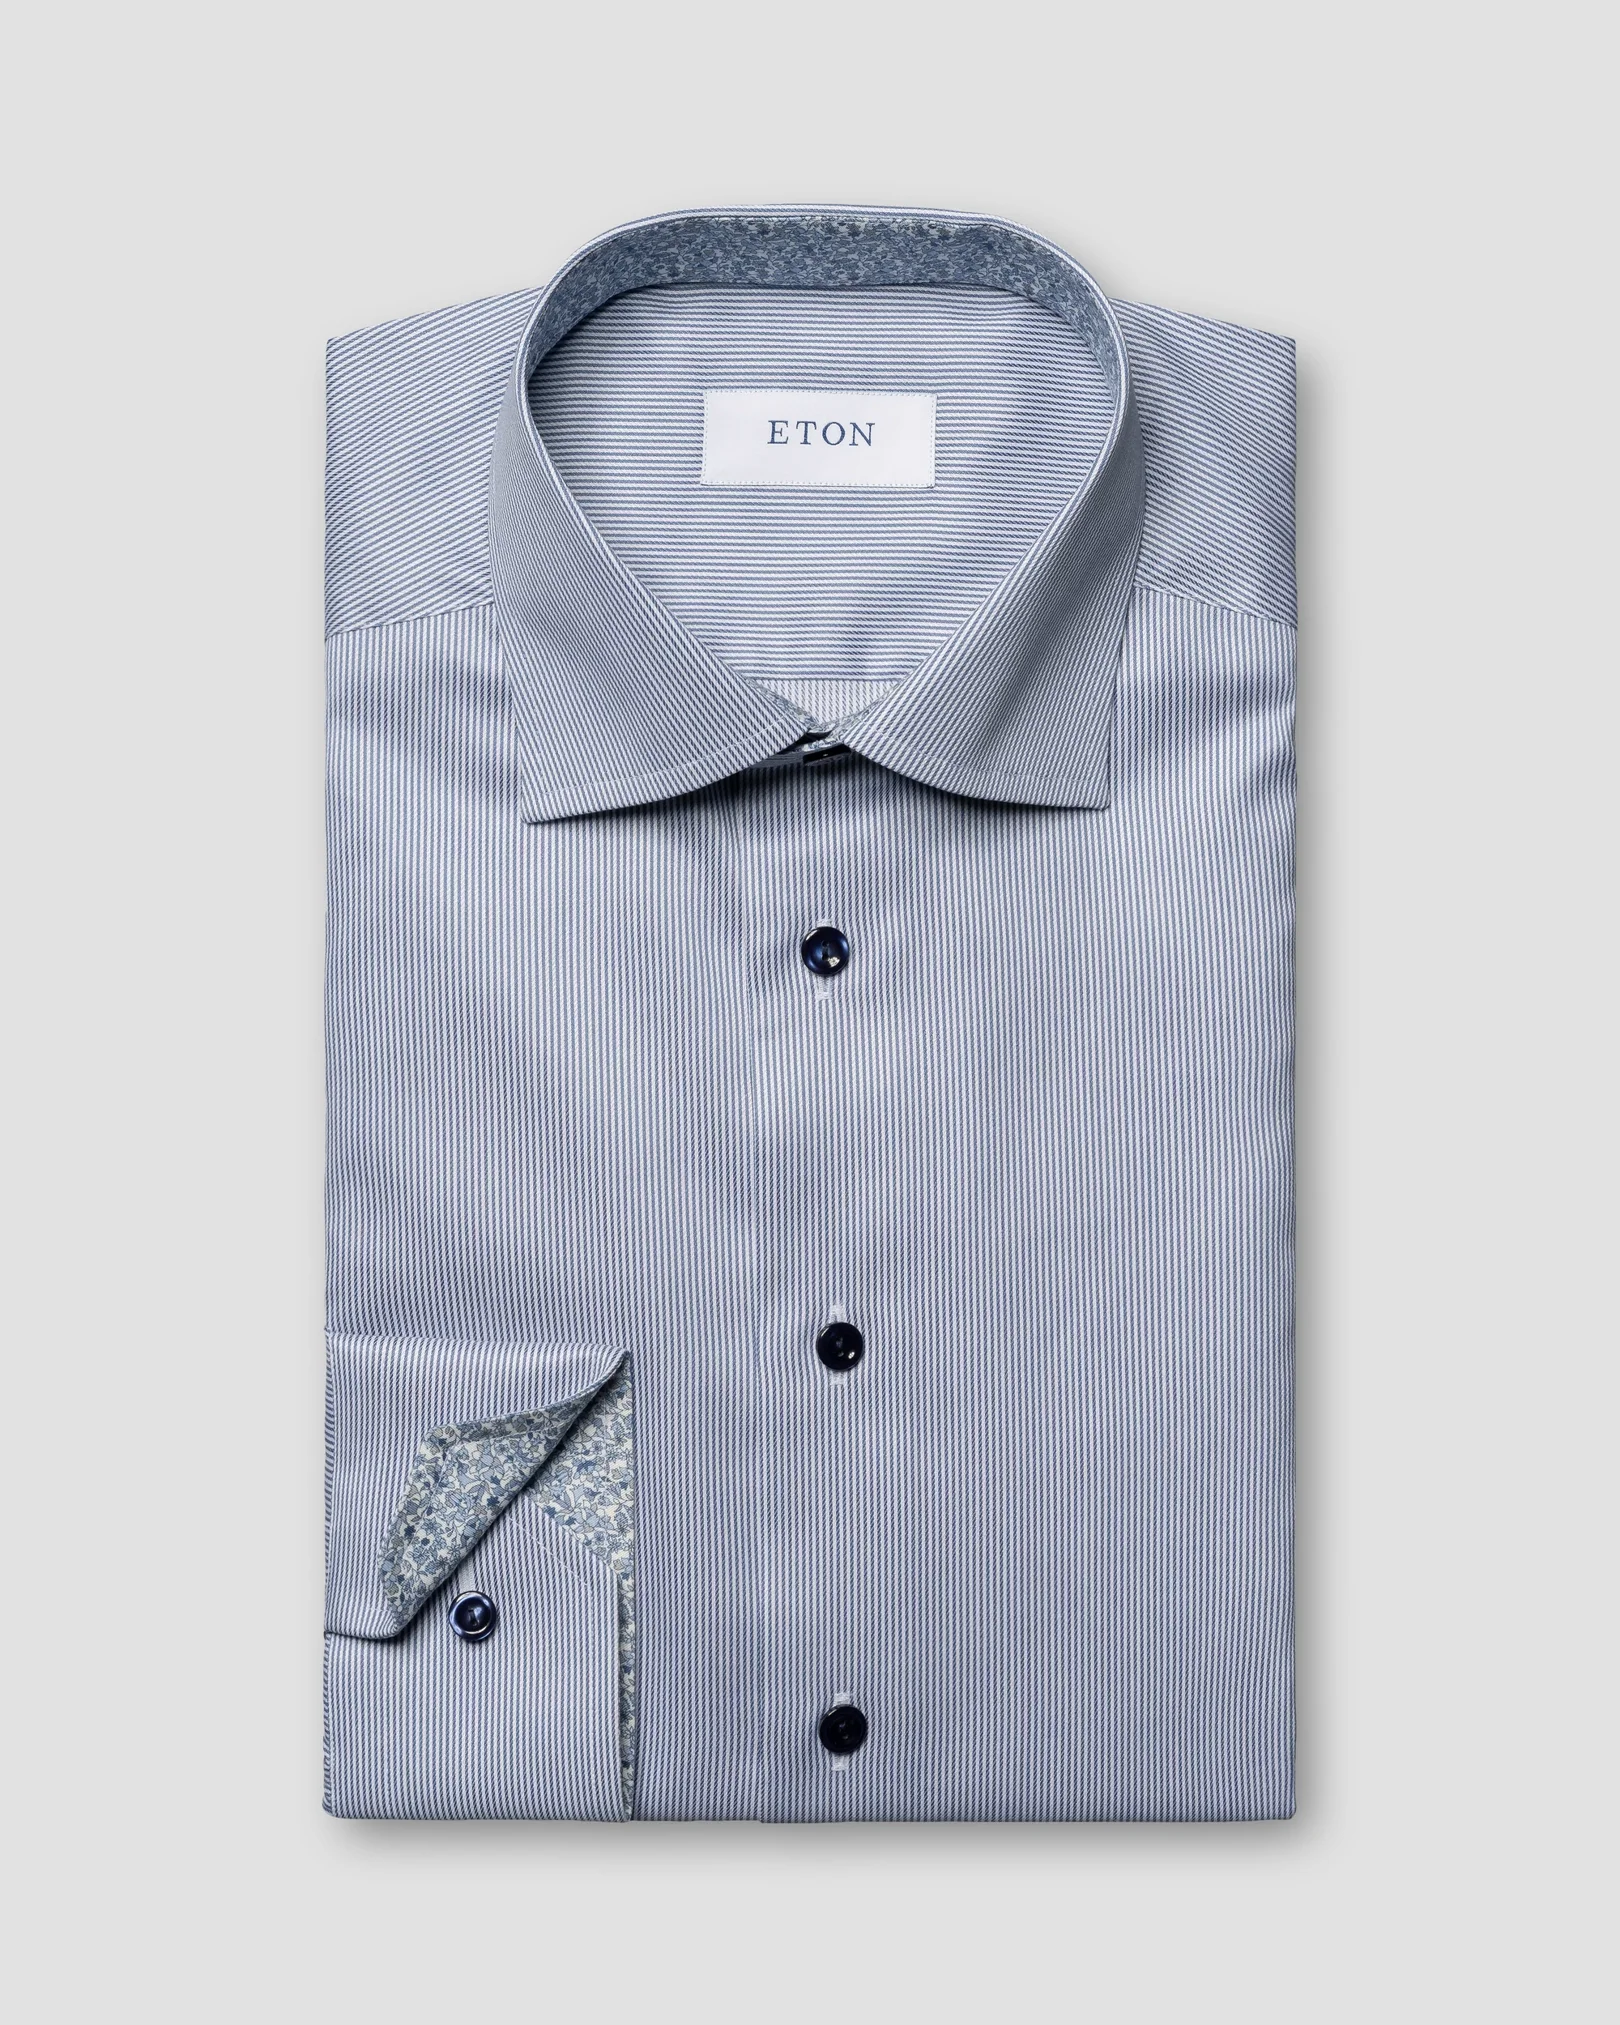 Eton - mid blue special detailed shirt